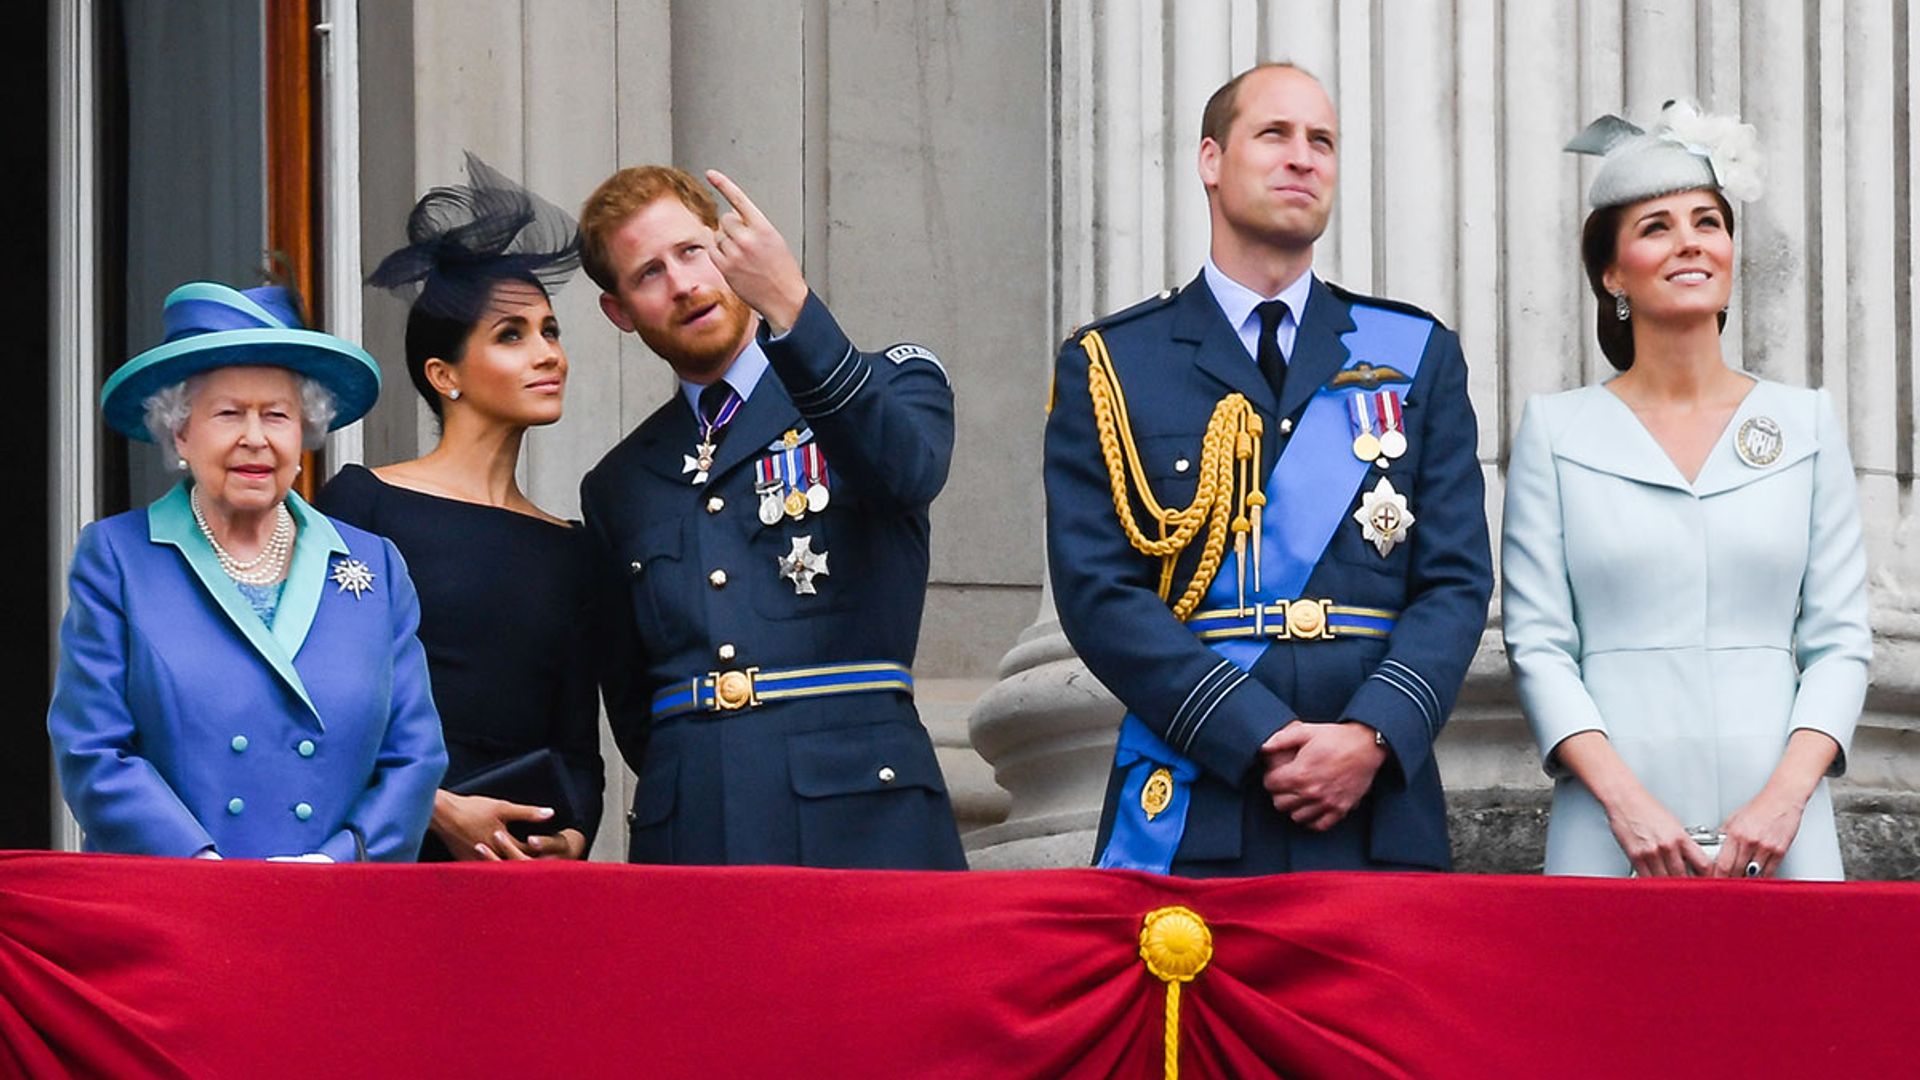 Royal family: 7 words they do not use | HELLO!